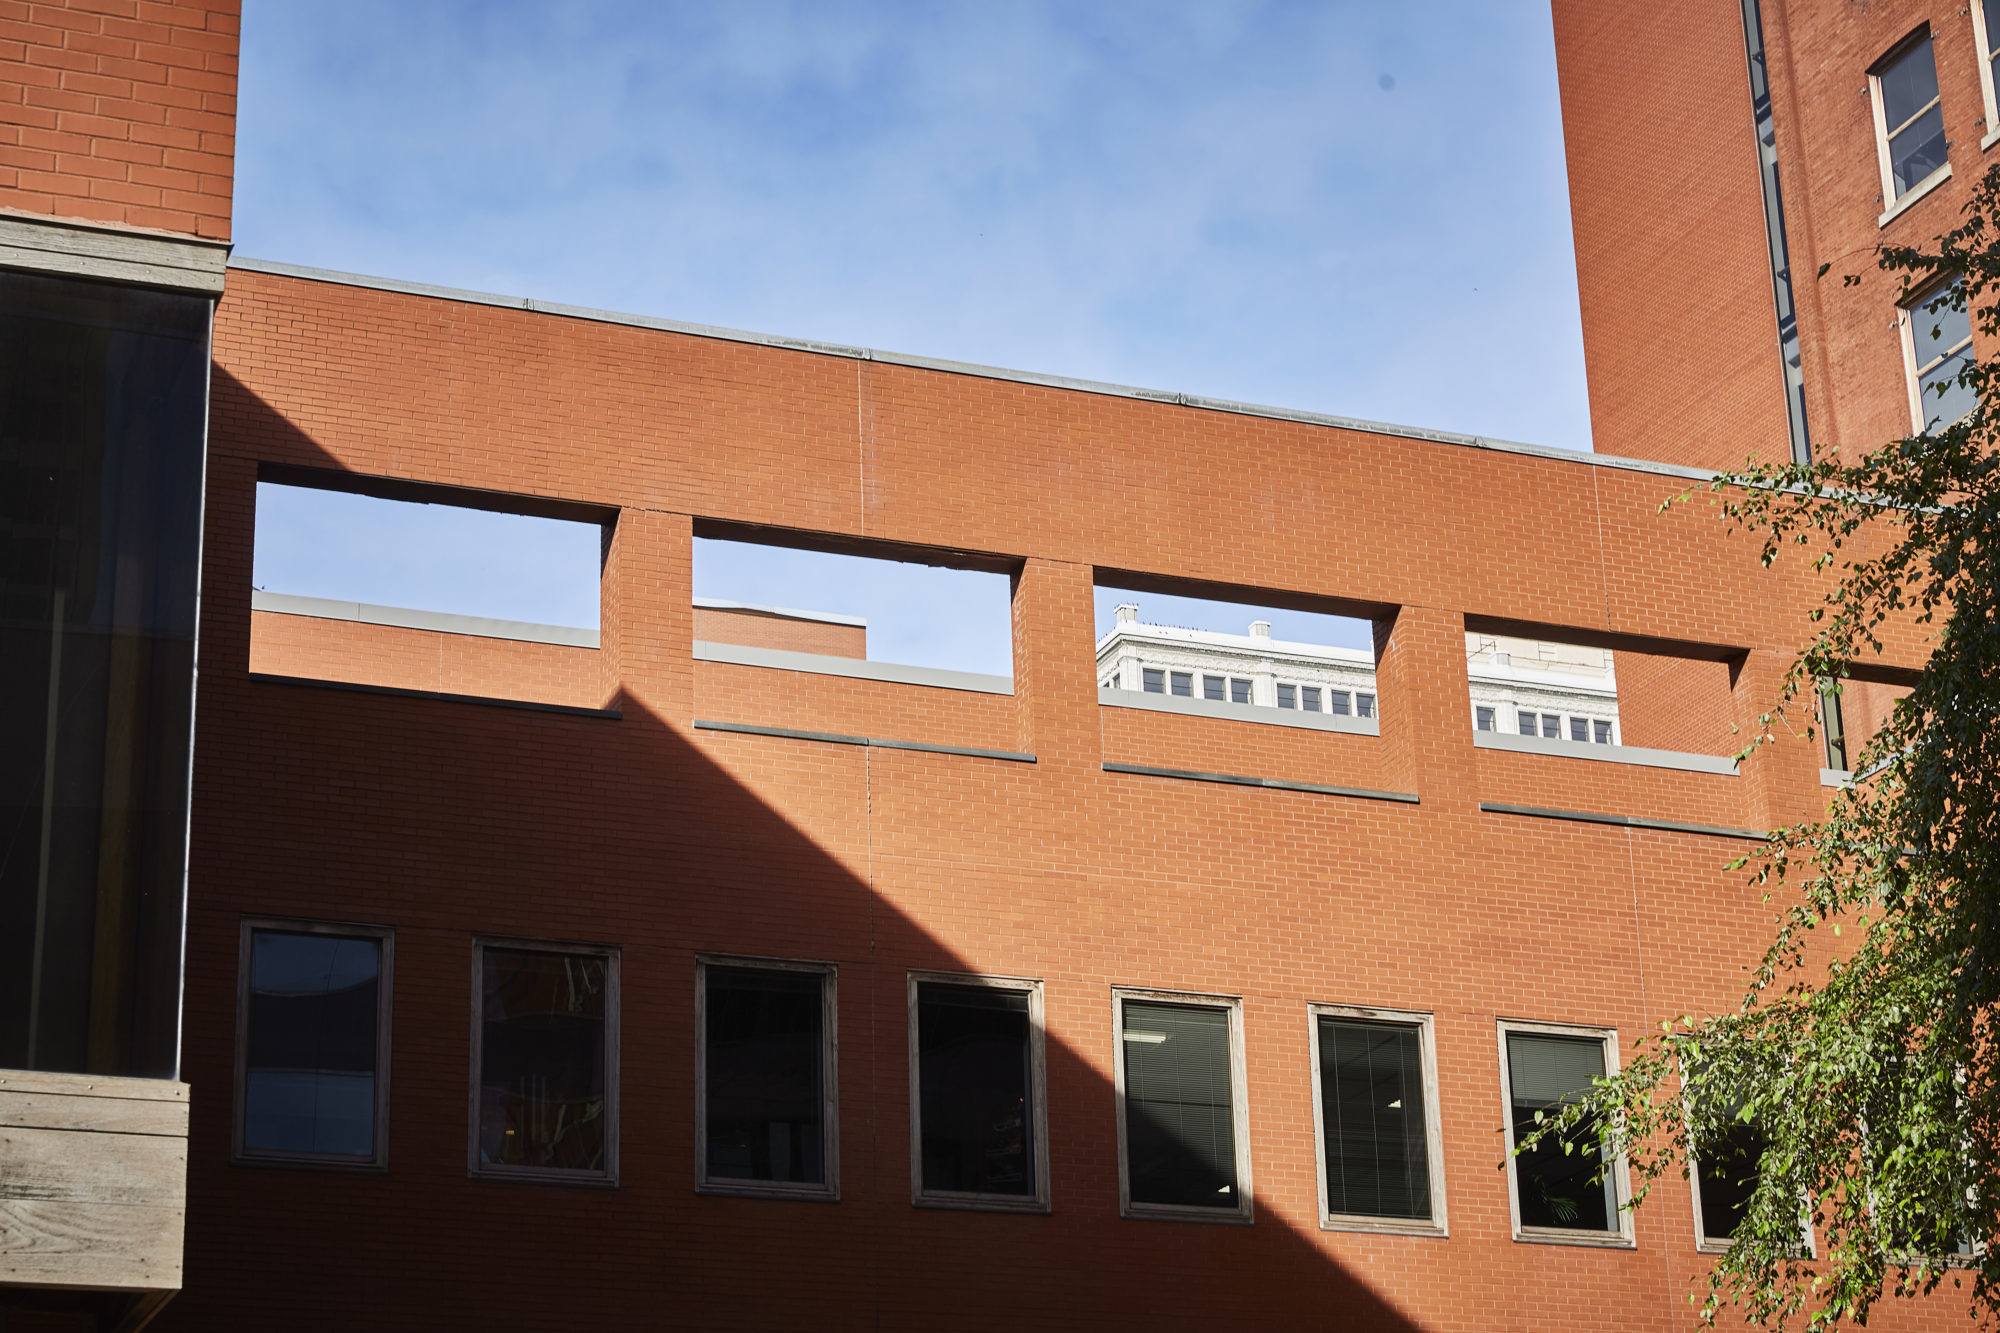 brick building against a blue sky with different sizes of rectangular windows